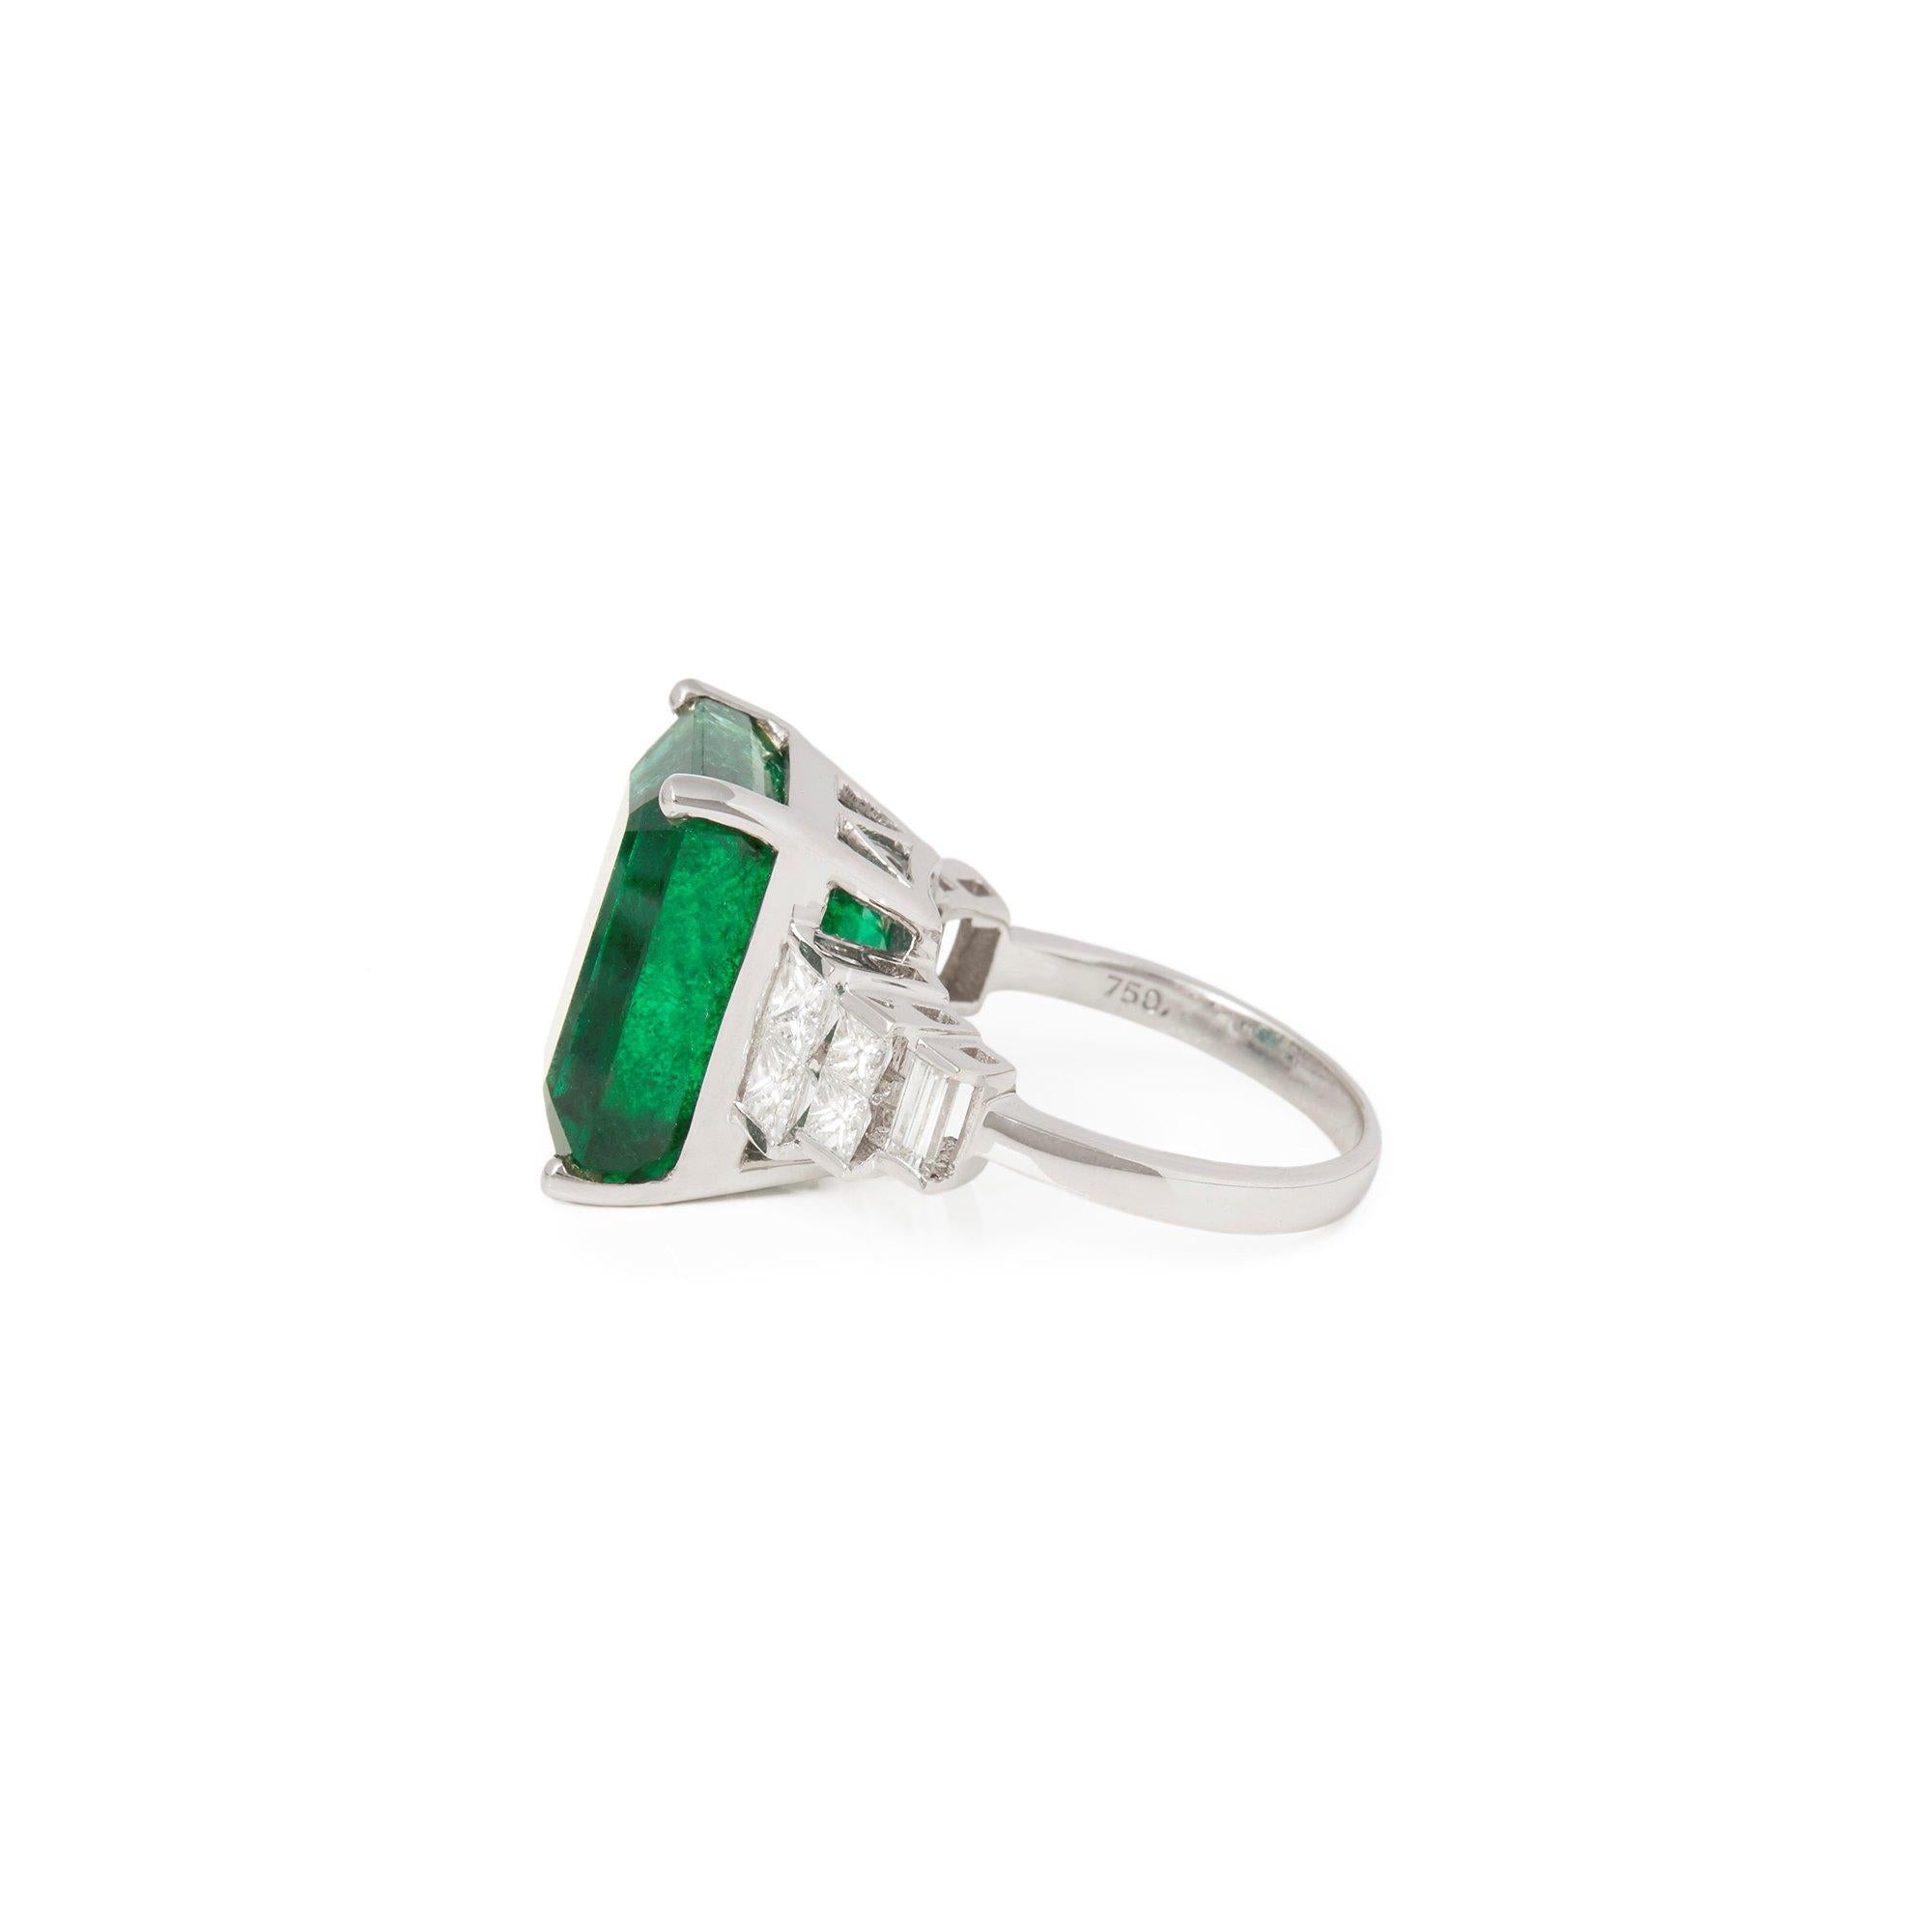 Certified 13.77ct Untreated Zambian Emerald Cut Emerald and Diamond 18ct Gold Ri In New Condition For Sale In Bishop's Stortford, Hertfordshire